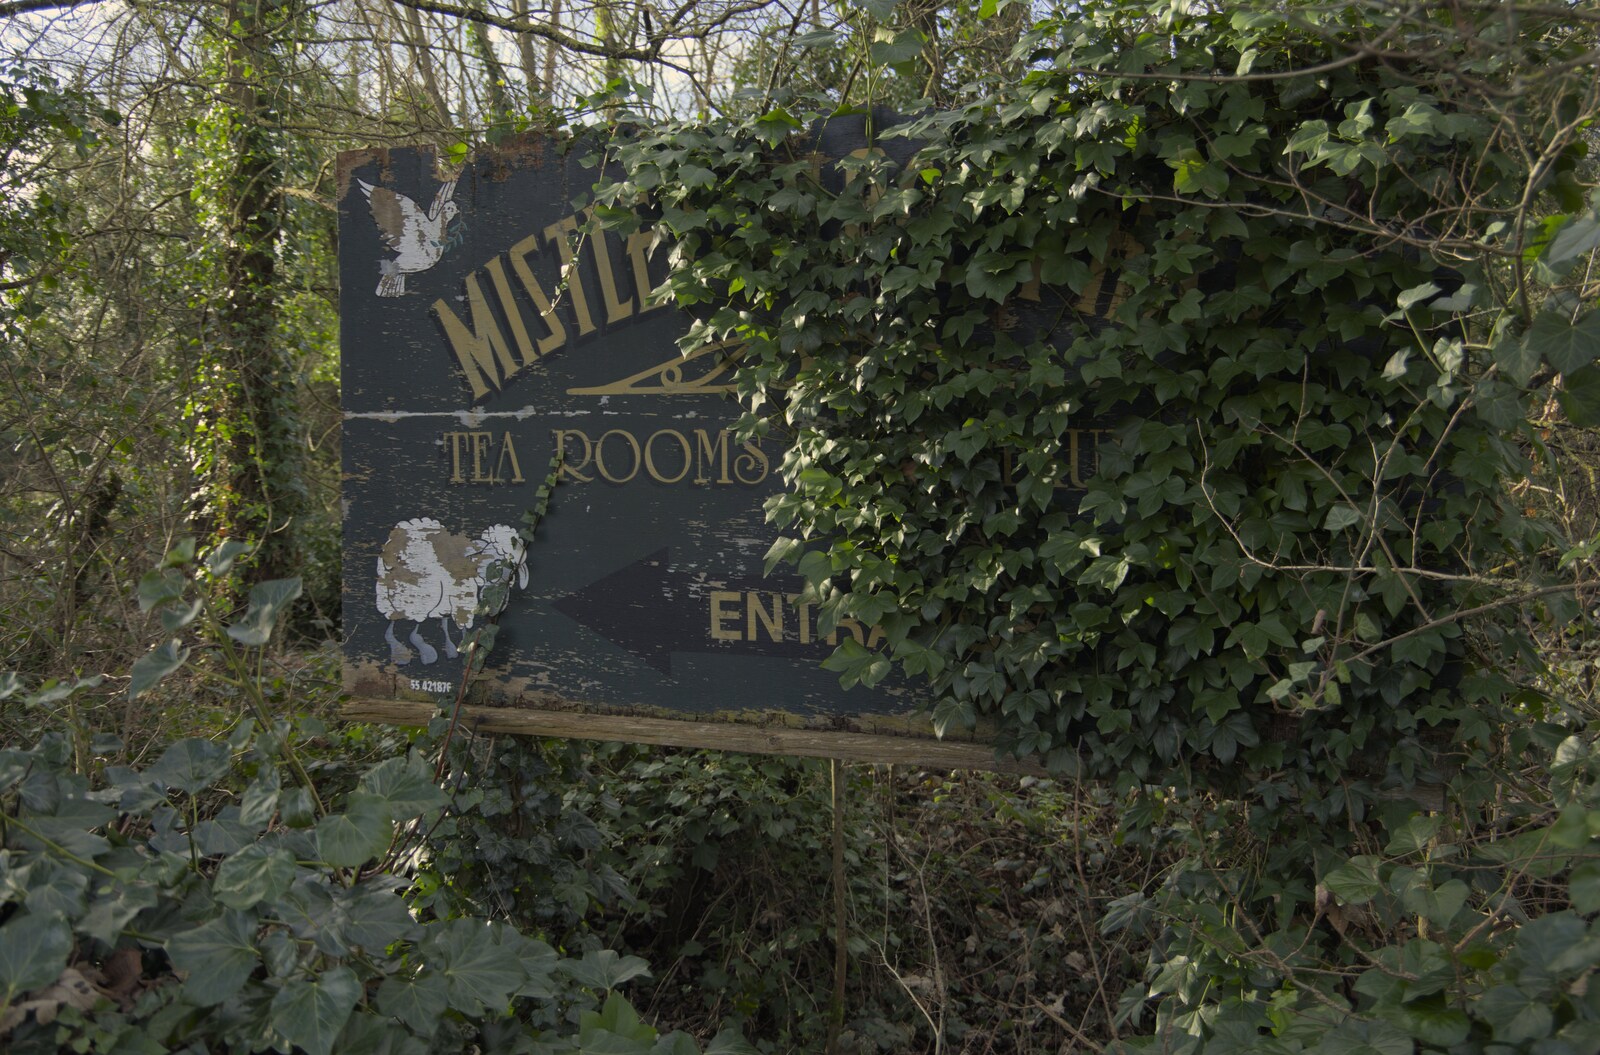 A derelict sign for a tea rooms in Mistley from A Postcard from Manningtree, Essex - 9th January 2024